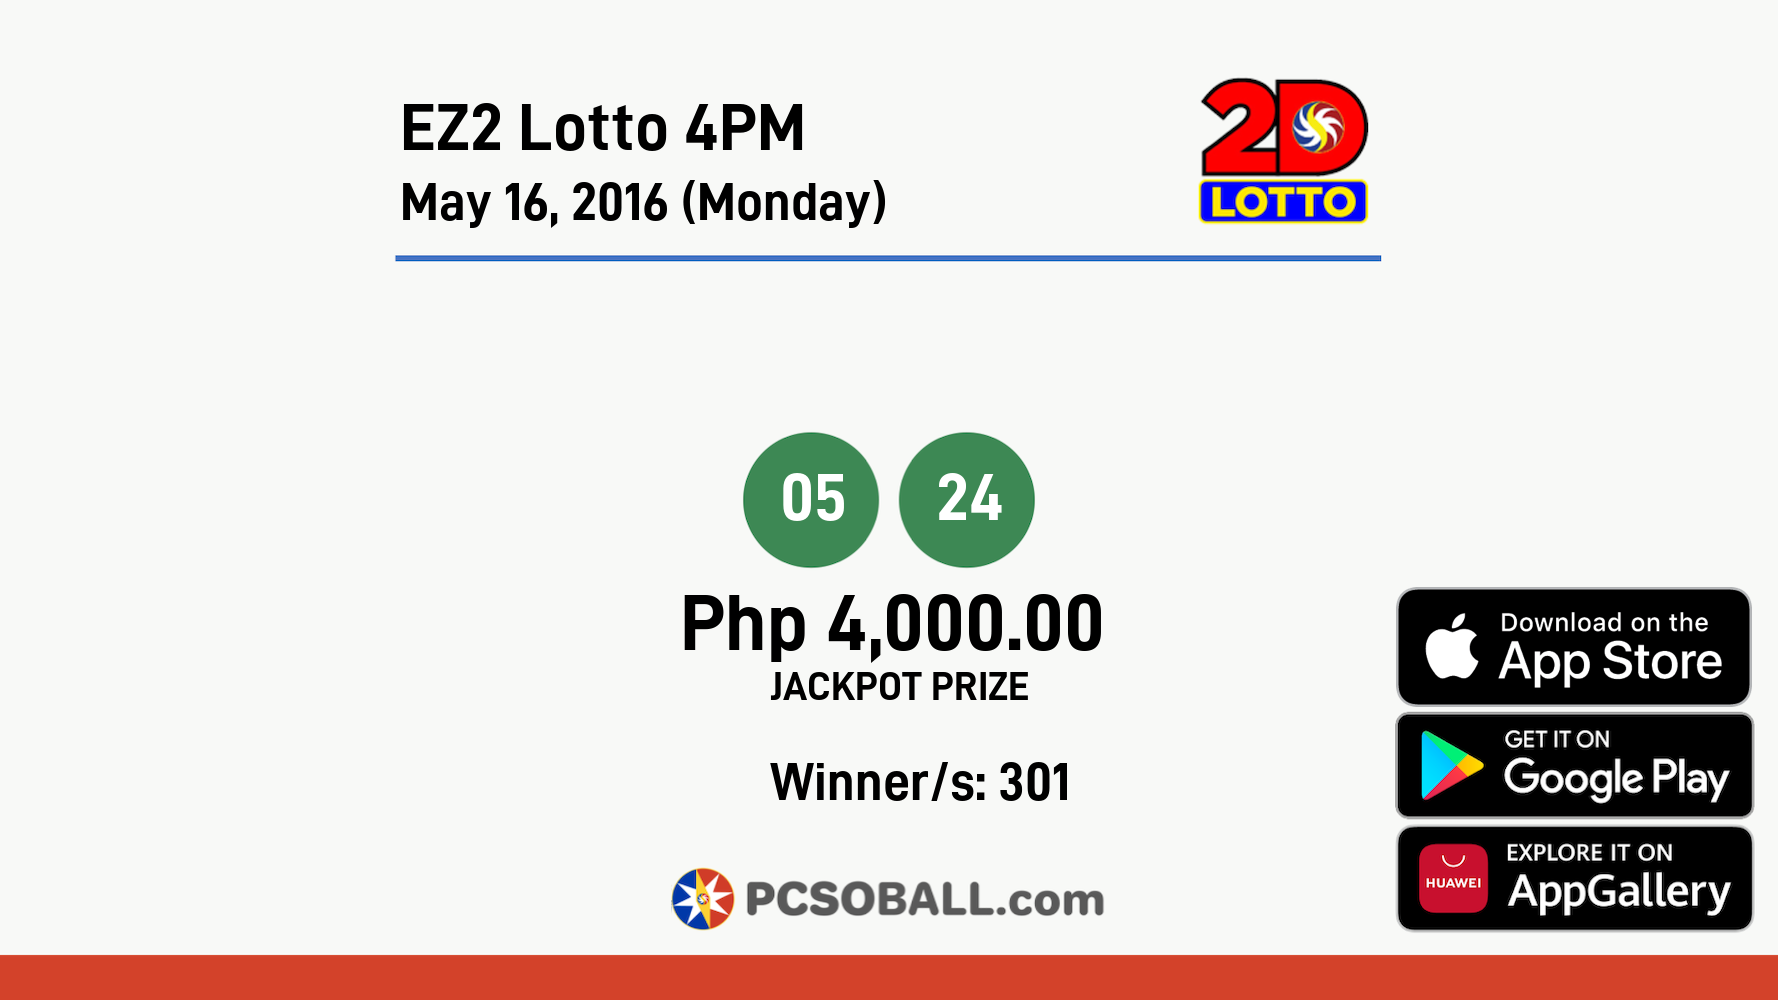 EZ2 Lotto 4PM May 16, 2016 (Monday) Result